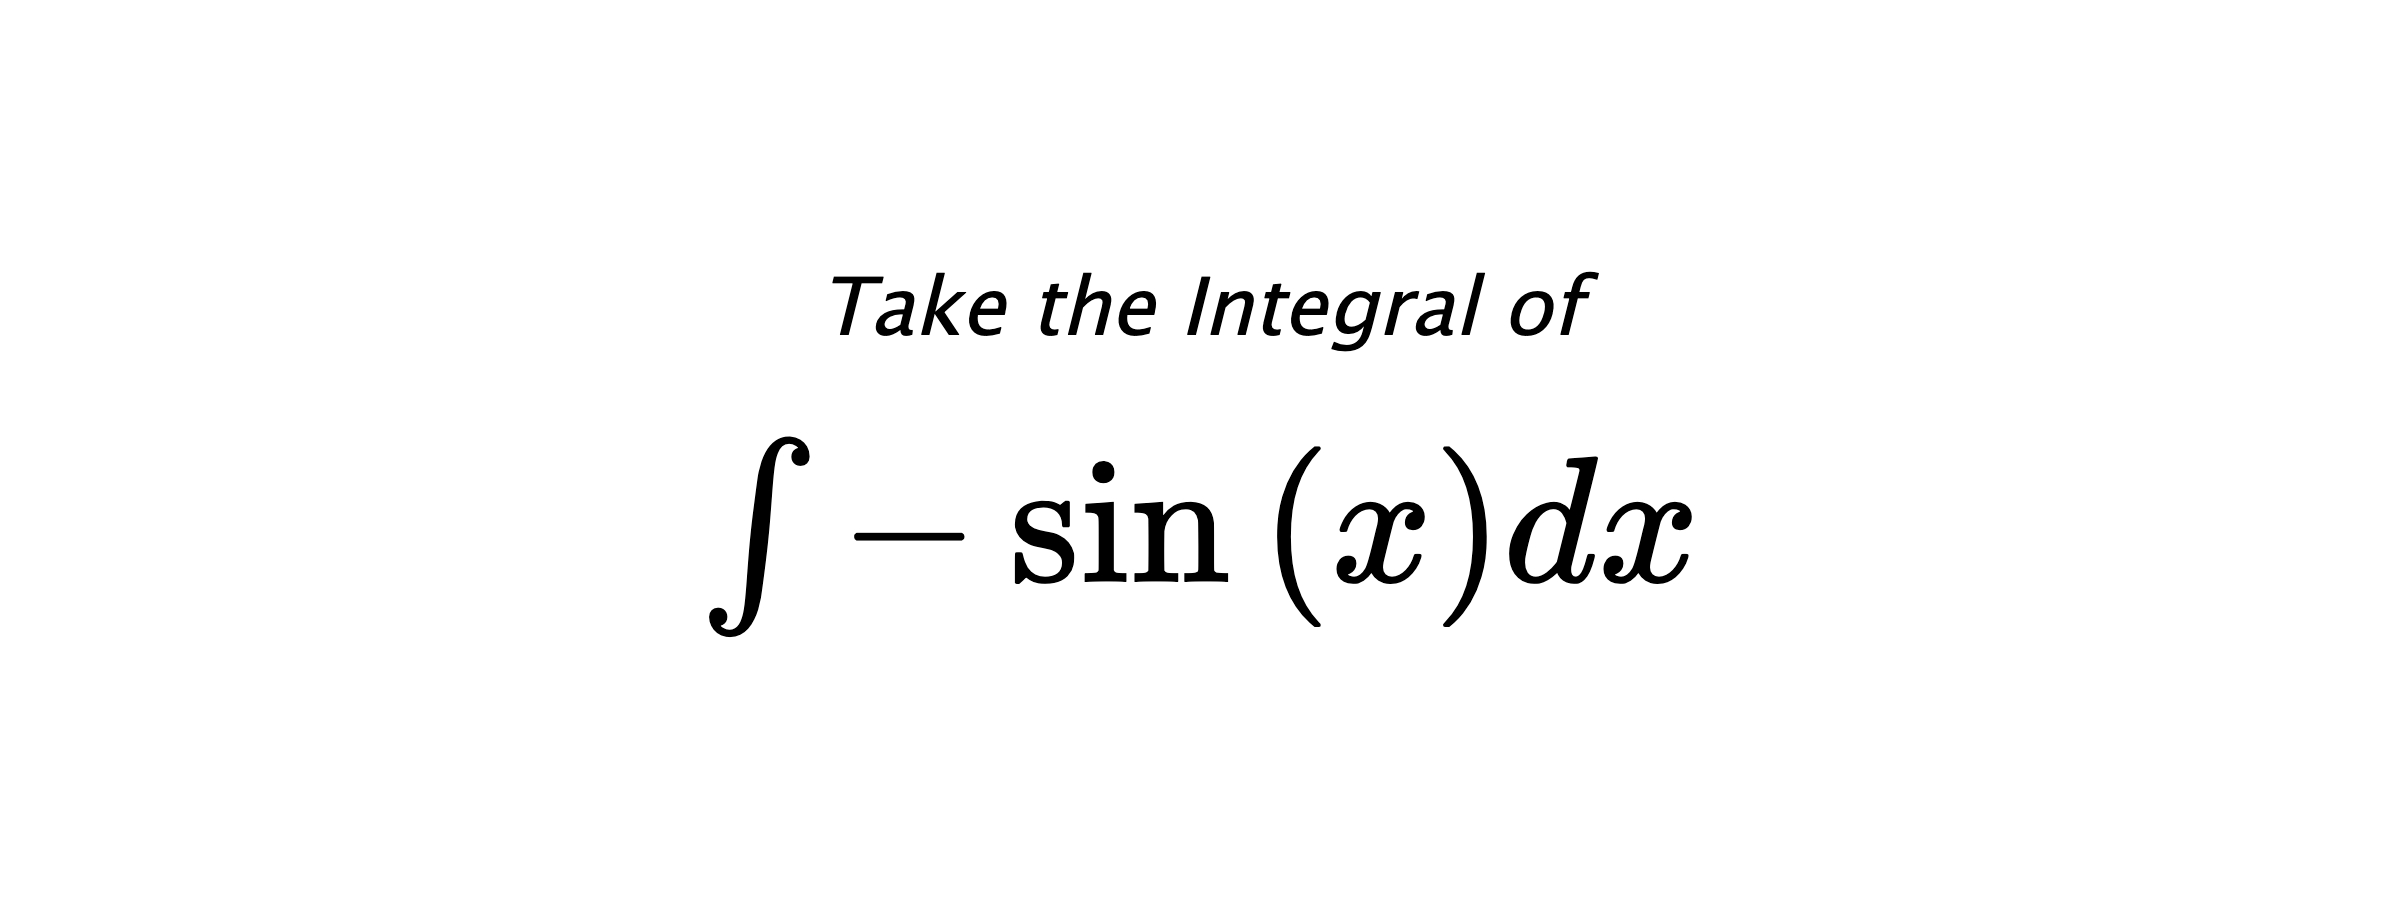 Take the Integral of $ \int - \sin{\left(x \right)} dx $